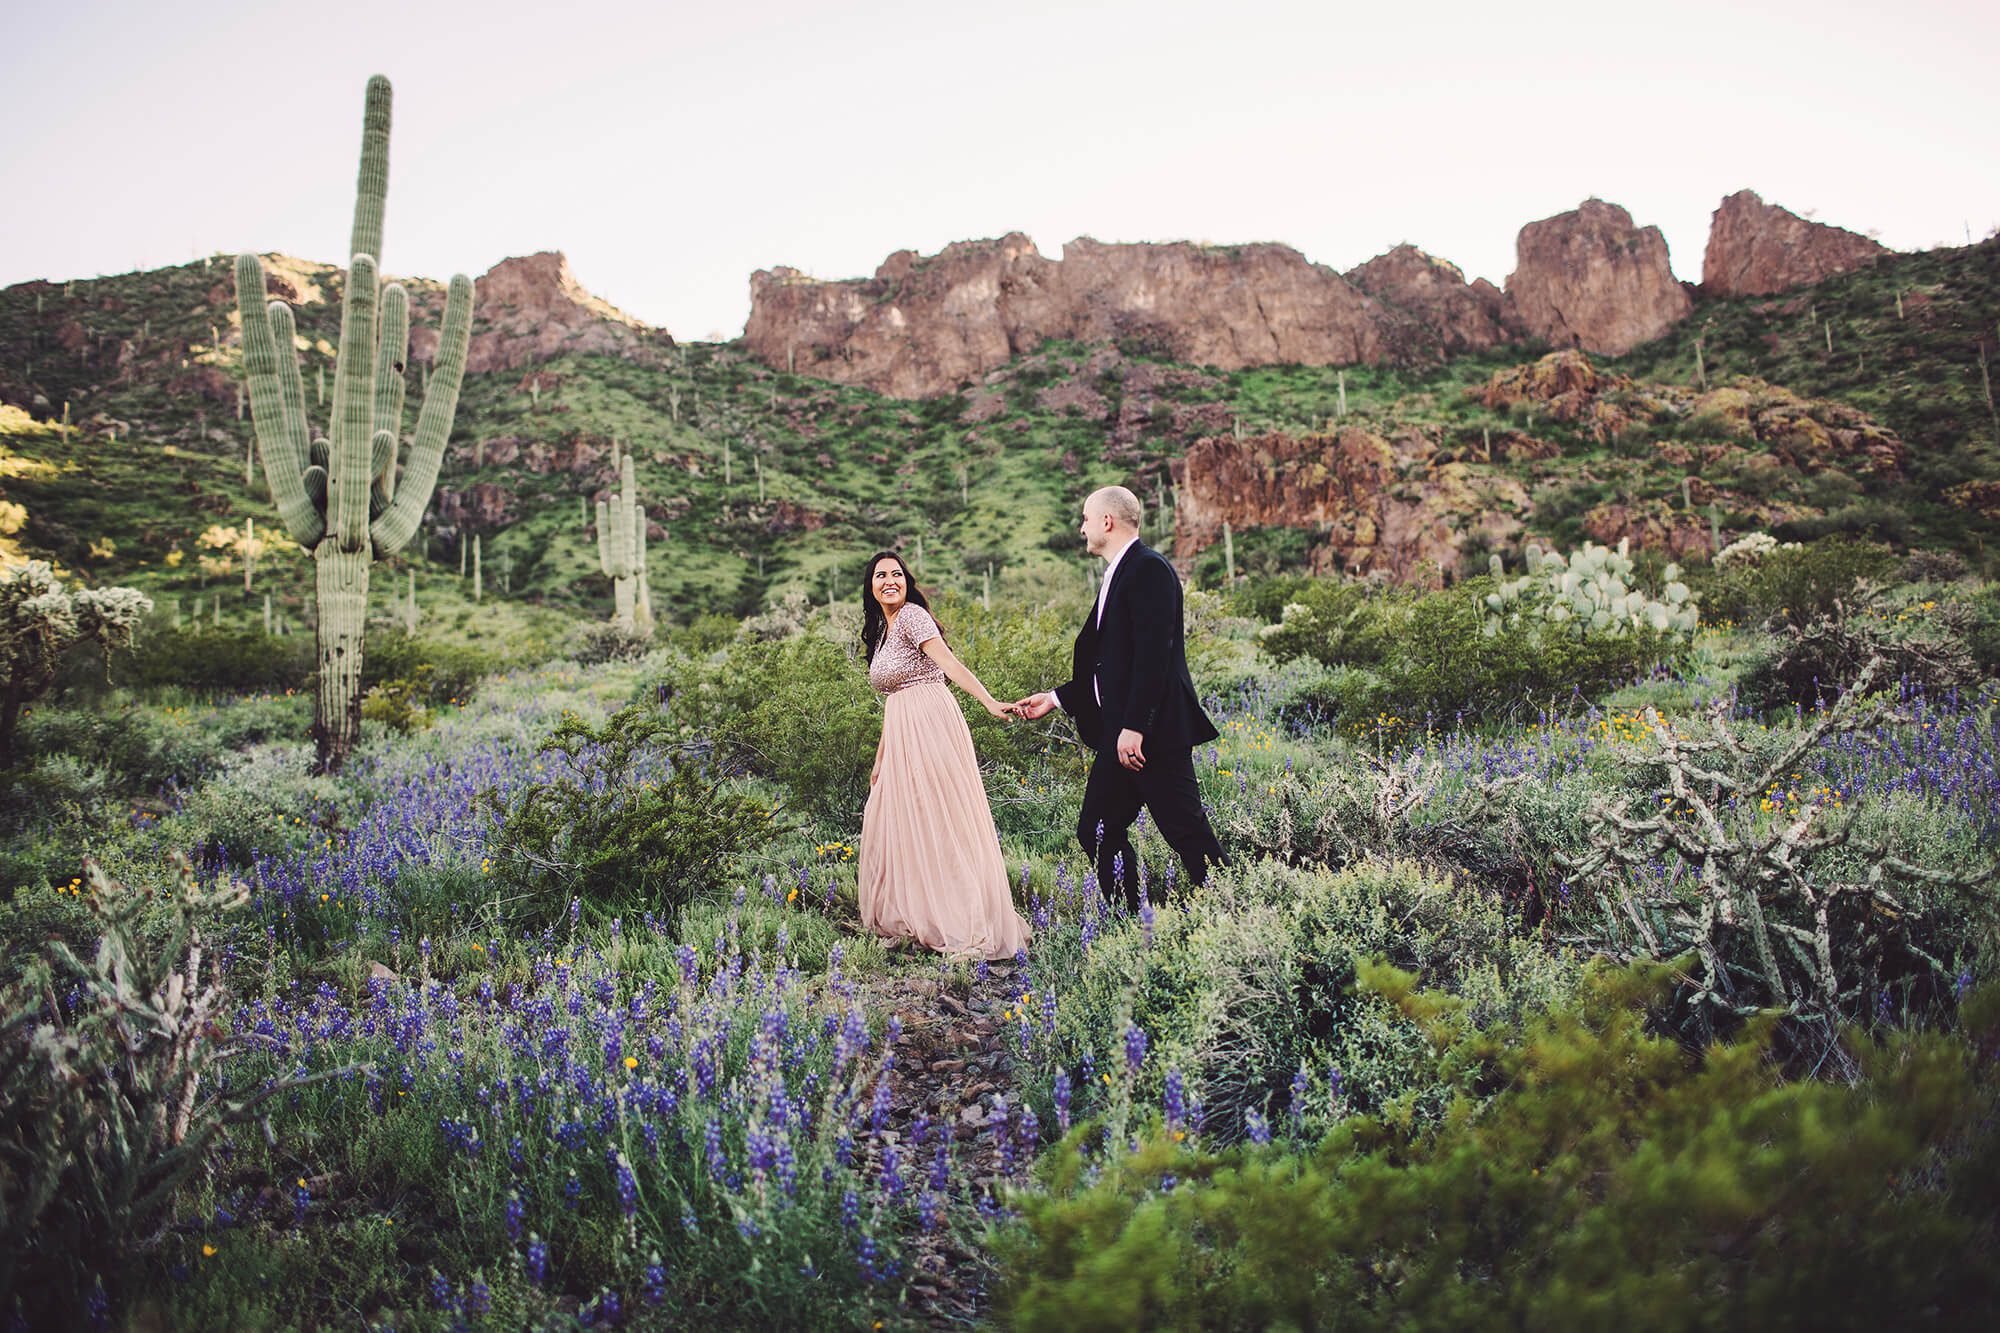 Vanessa leads Brad through the wildflowers at Picacho Peak during their couples session